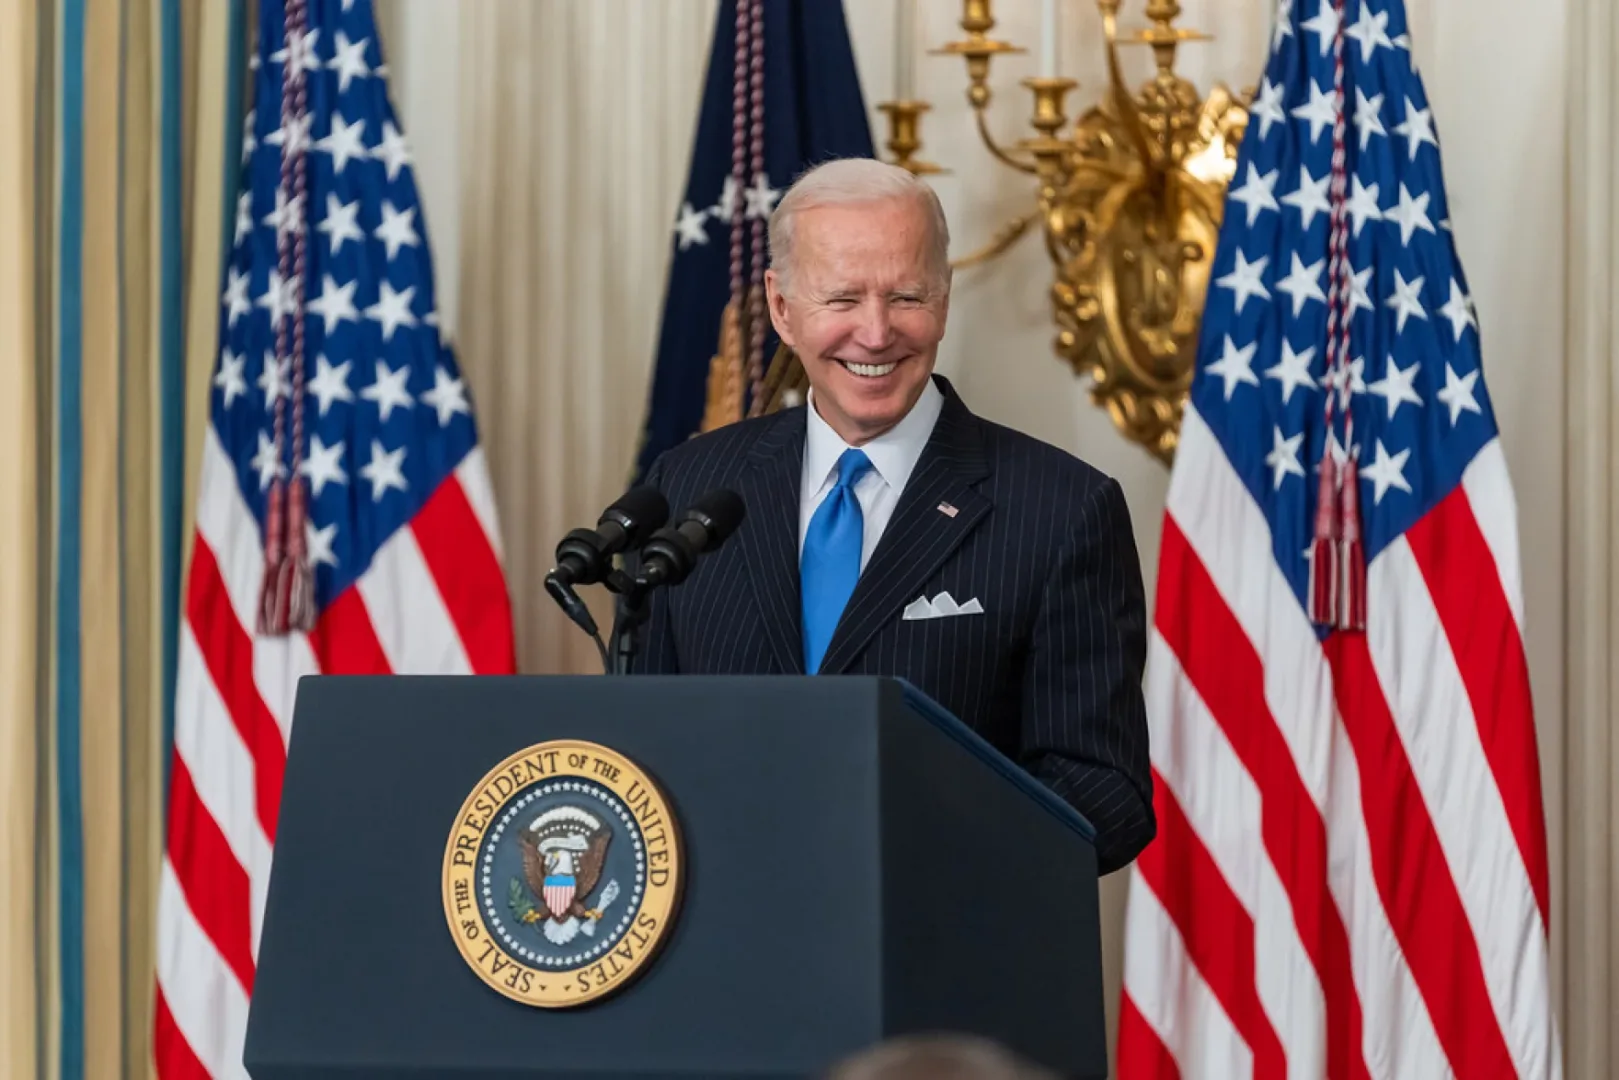 Biden smiles at a podium in front of two American flags.